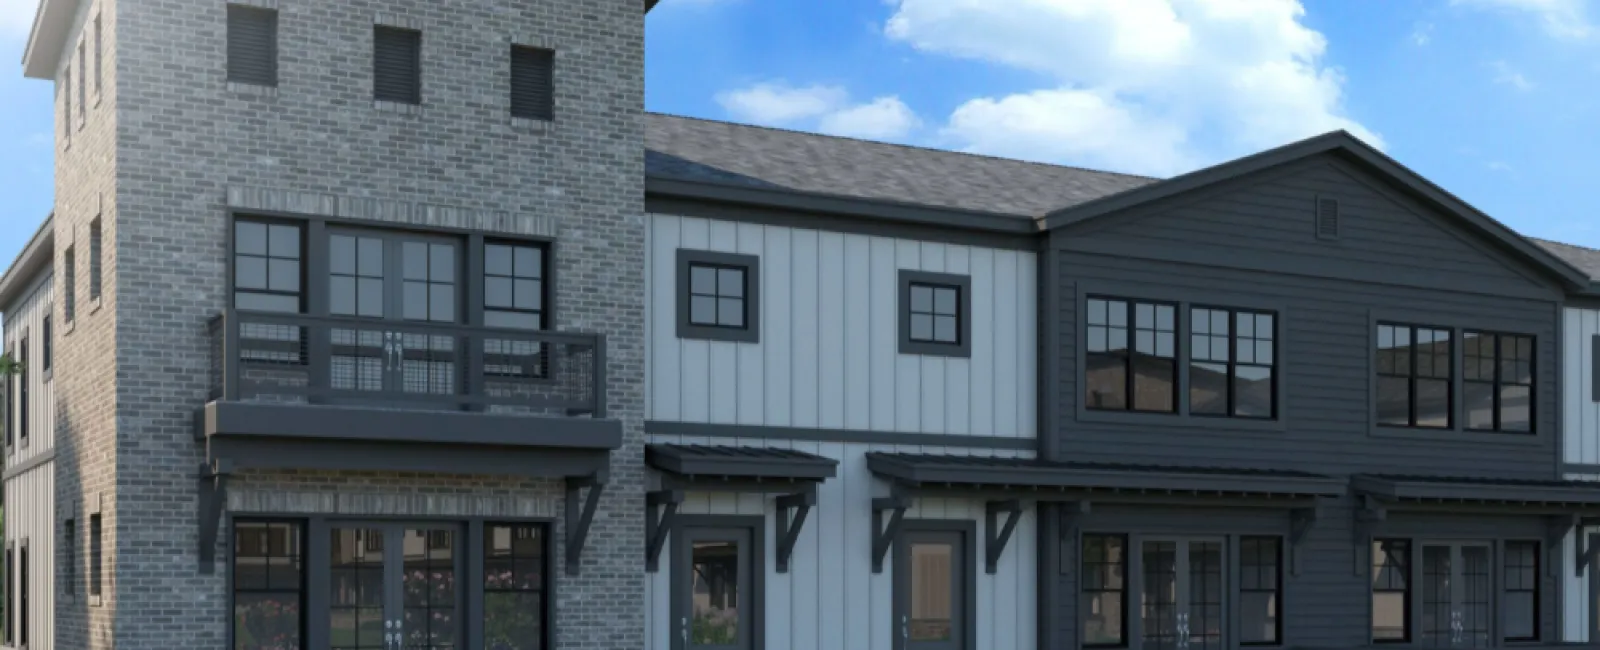 Coming Soon to Hapeville: New Homes at Serenity